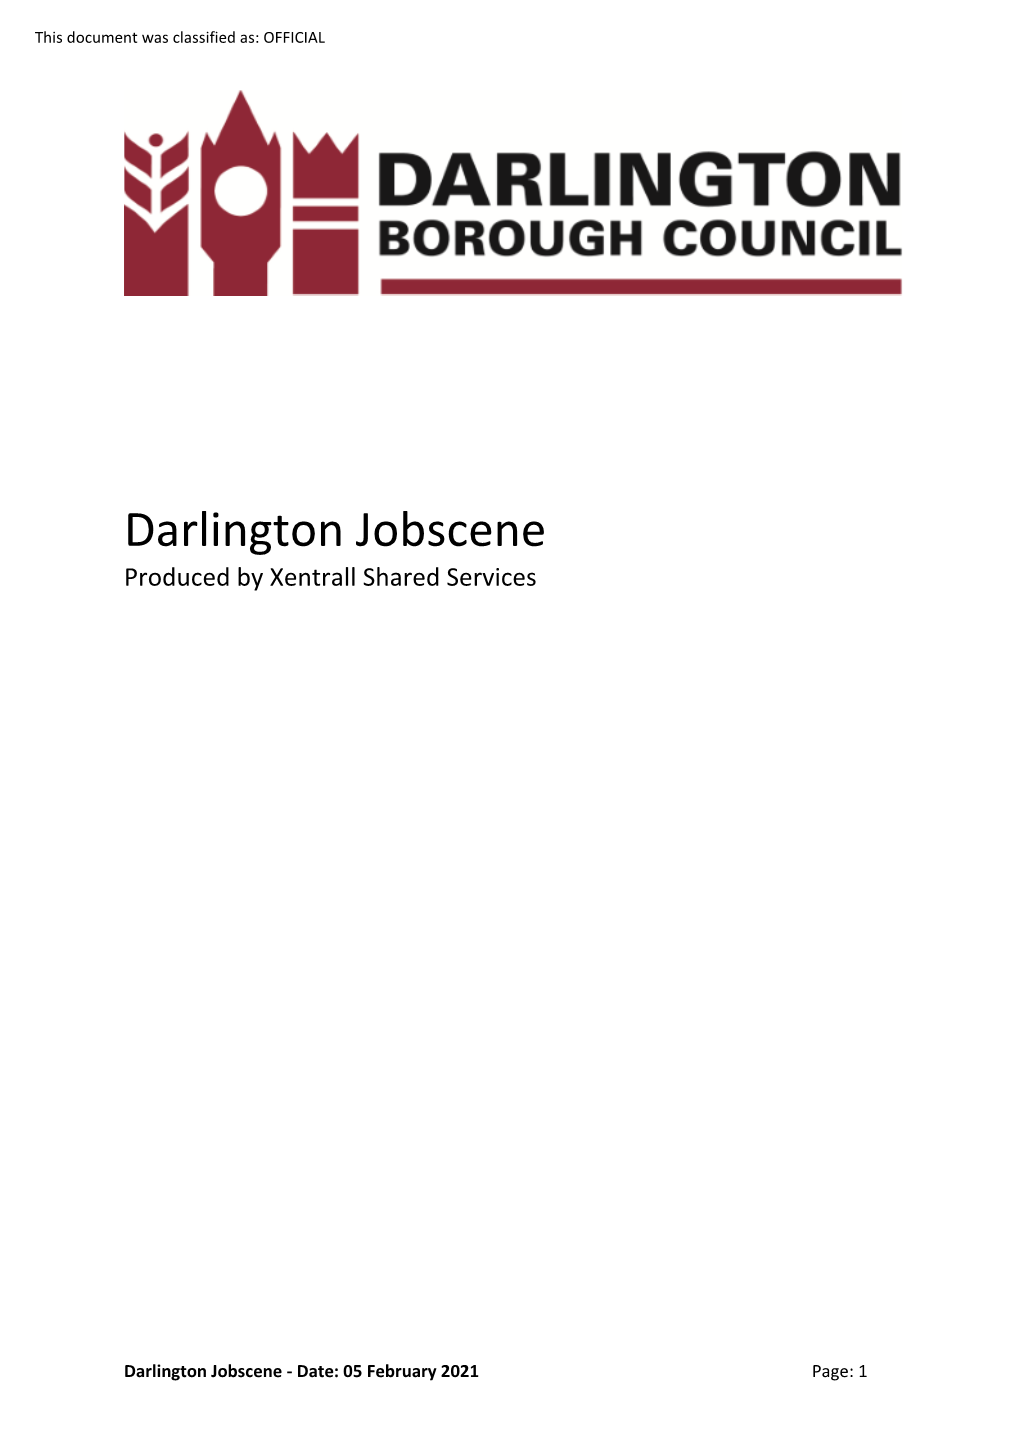 Darlington Jobscene Produced by Xentrall Shared Services